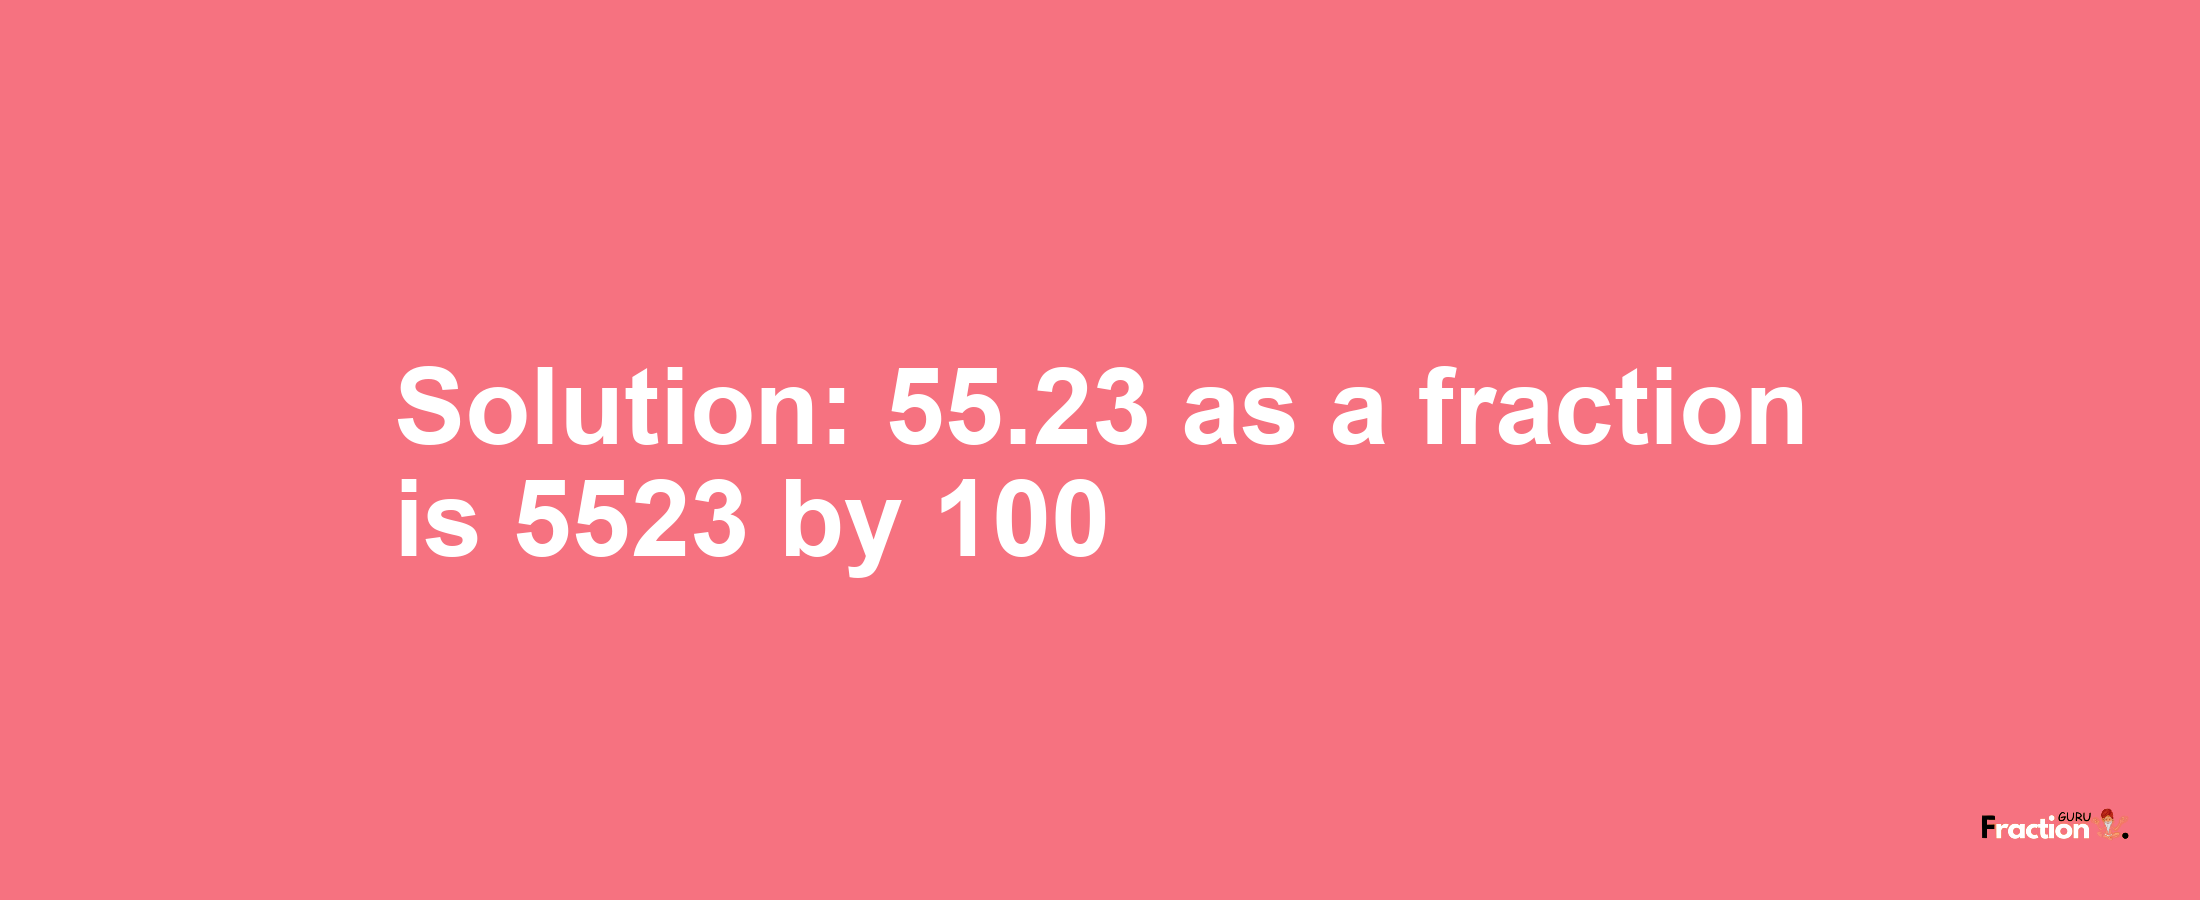 Solution:55.23 as a fraction is 5523/100